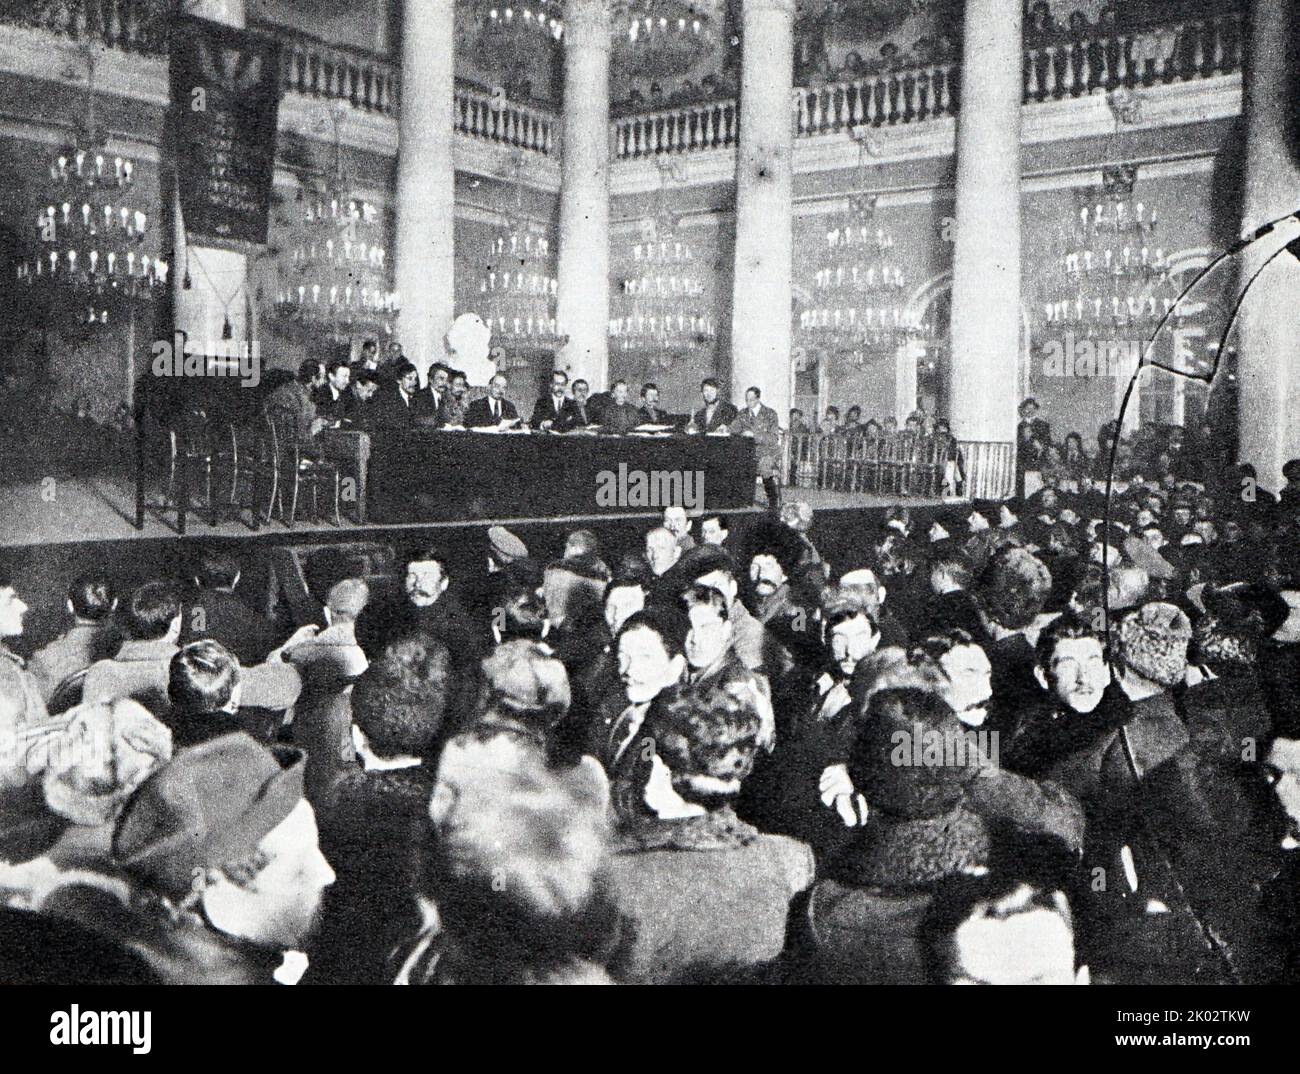 Lenin V. I. , Sverdlov Ya. M. , on the presidium of the first All-Russian Congress of Land Departments, Committees of the Poor and Agricultural Communes in the Column Hall of the House of Unions. 1918, December 11. Moscow. Stock Photo